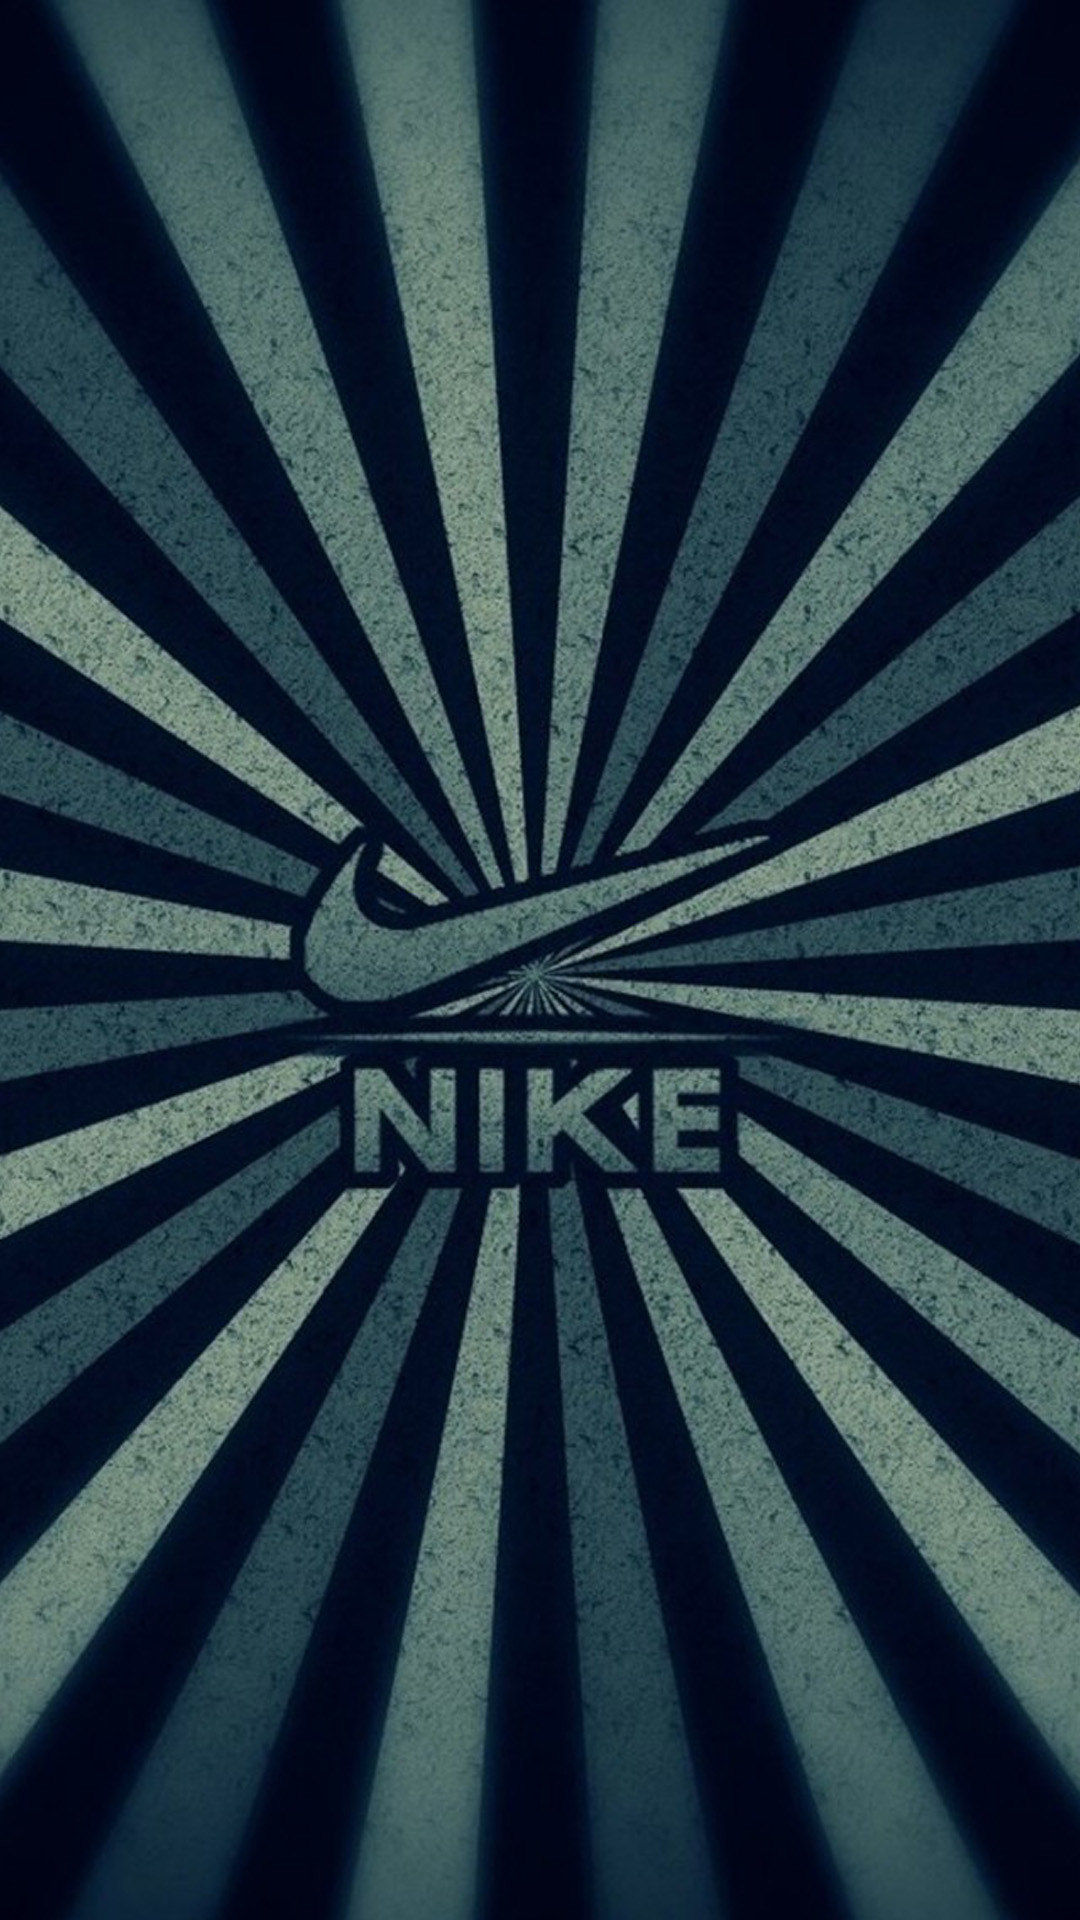 1080x1920 Nike LOGO 04 S4 Wallpapers, Samsung Galaxy S4 Wallpapers